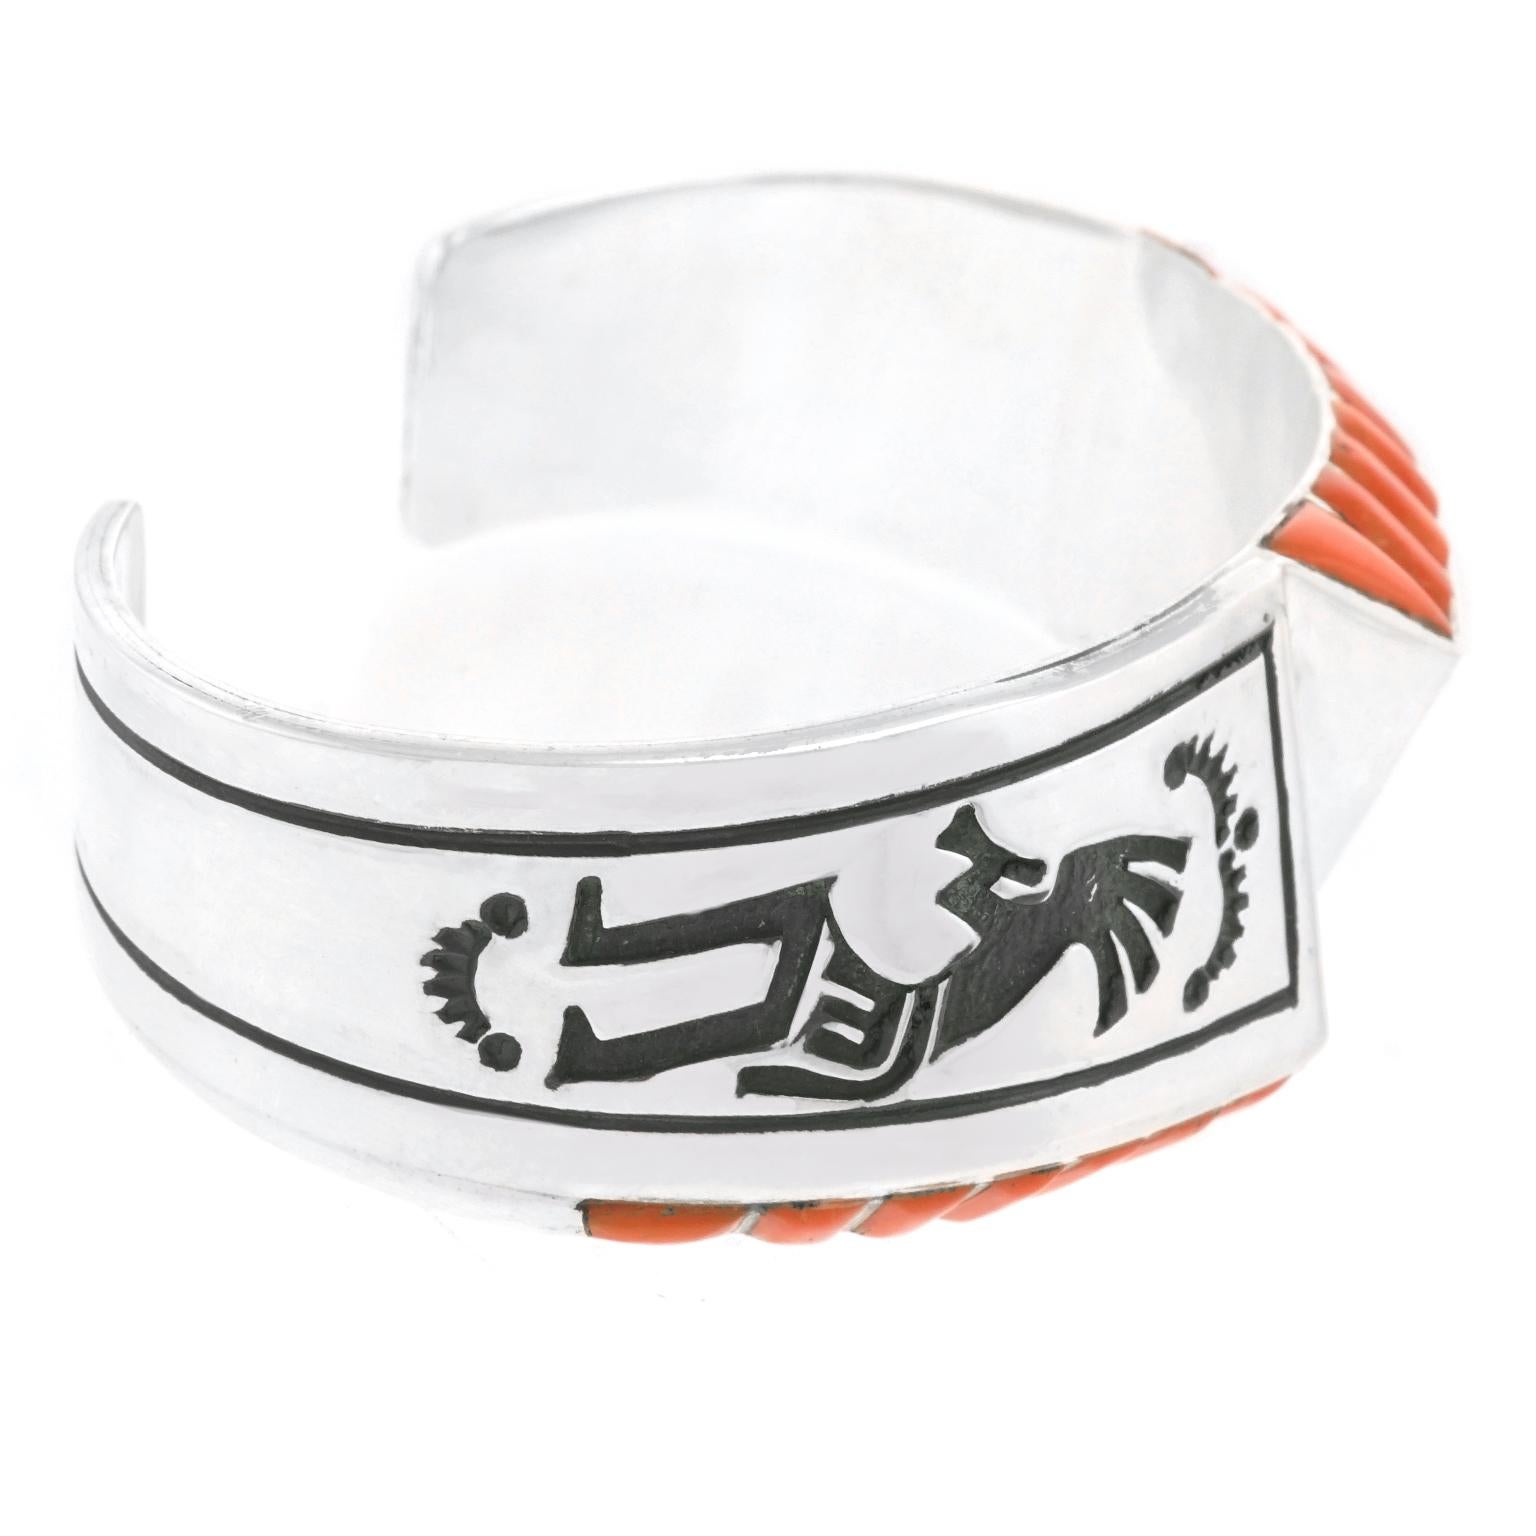 Women's or Men's Navajo Cuff Bracelet with Inlaid Coral by Leonard Jim